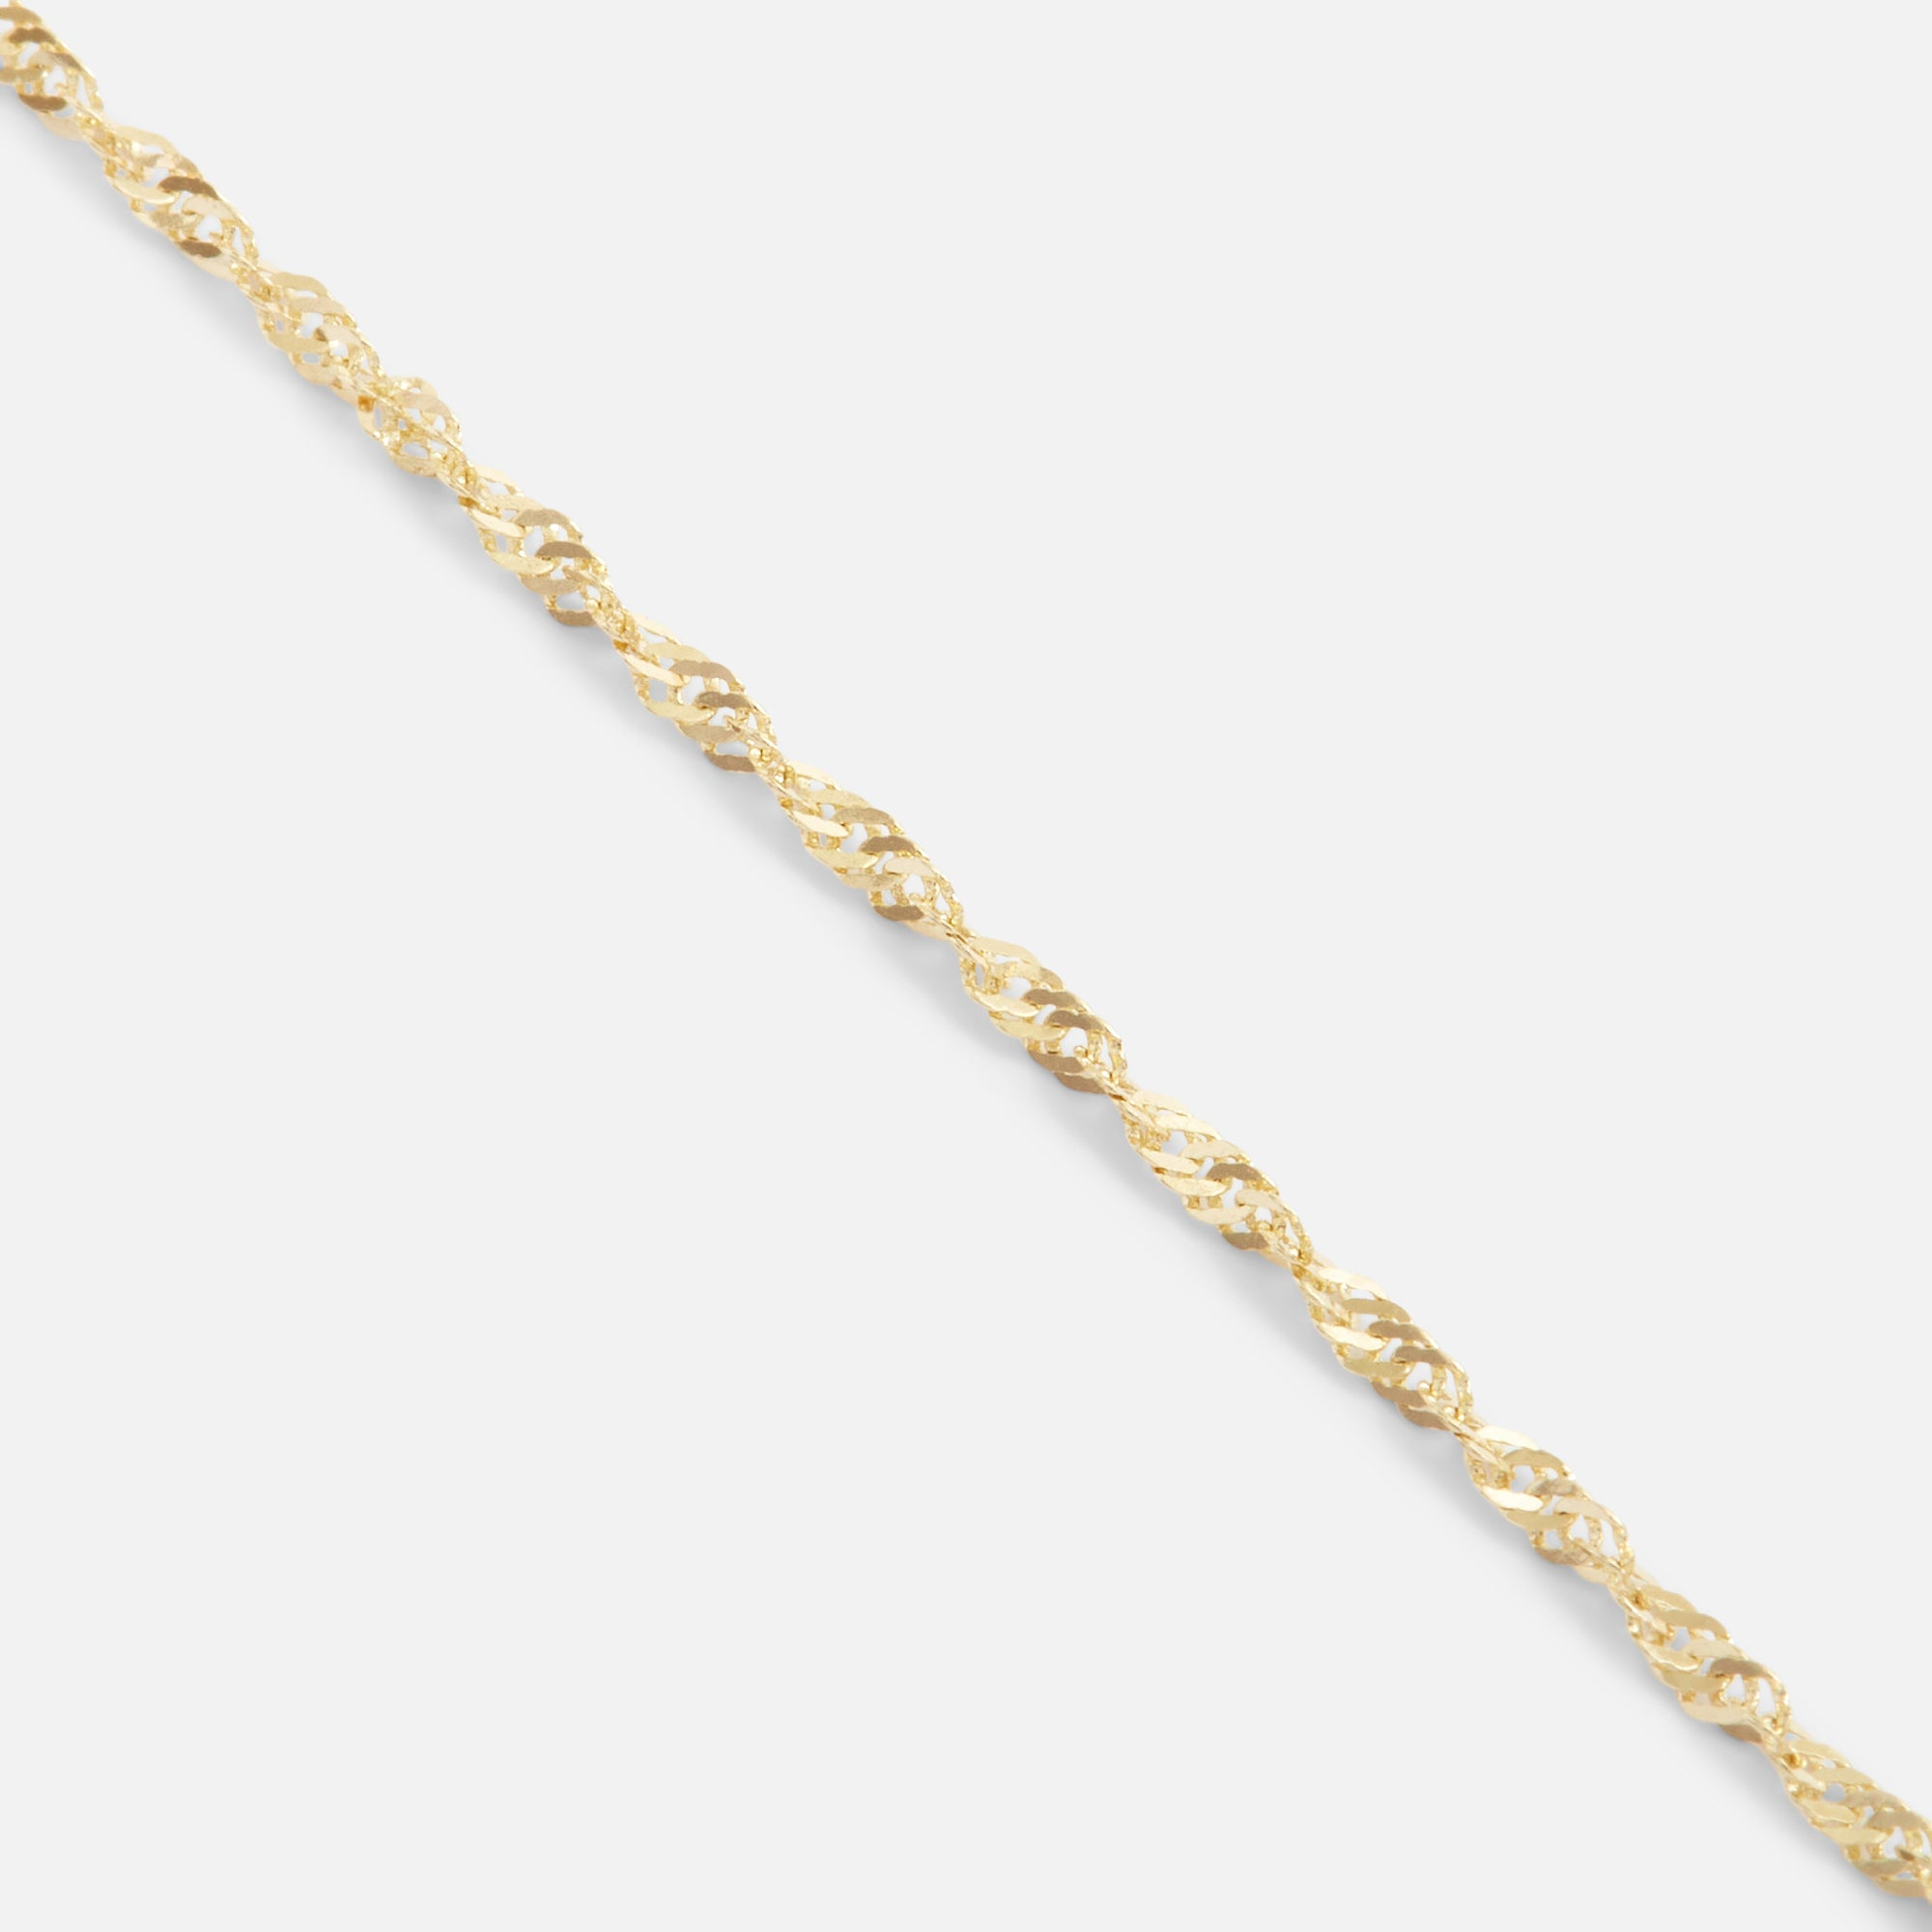 10k Gold singapore ankle chain